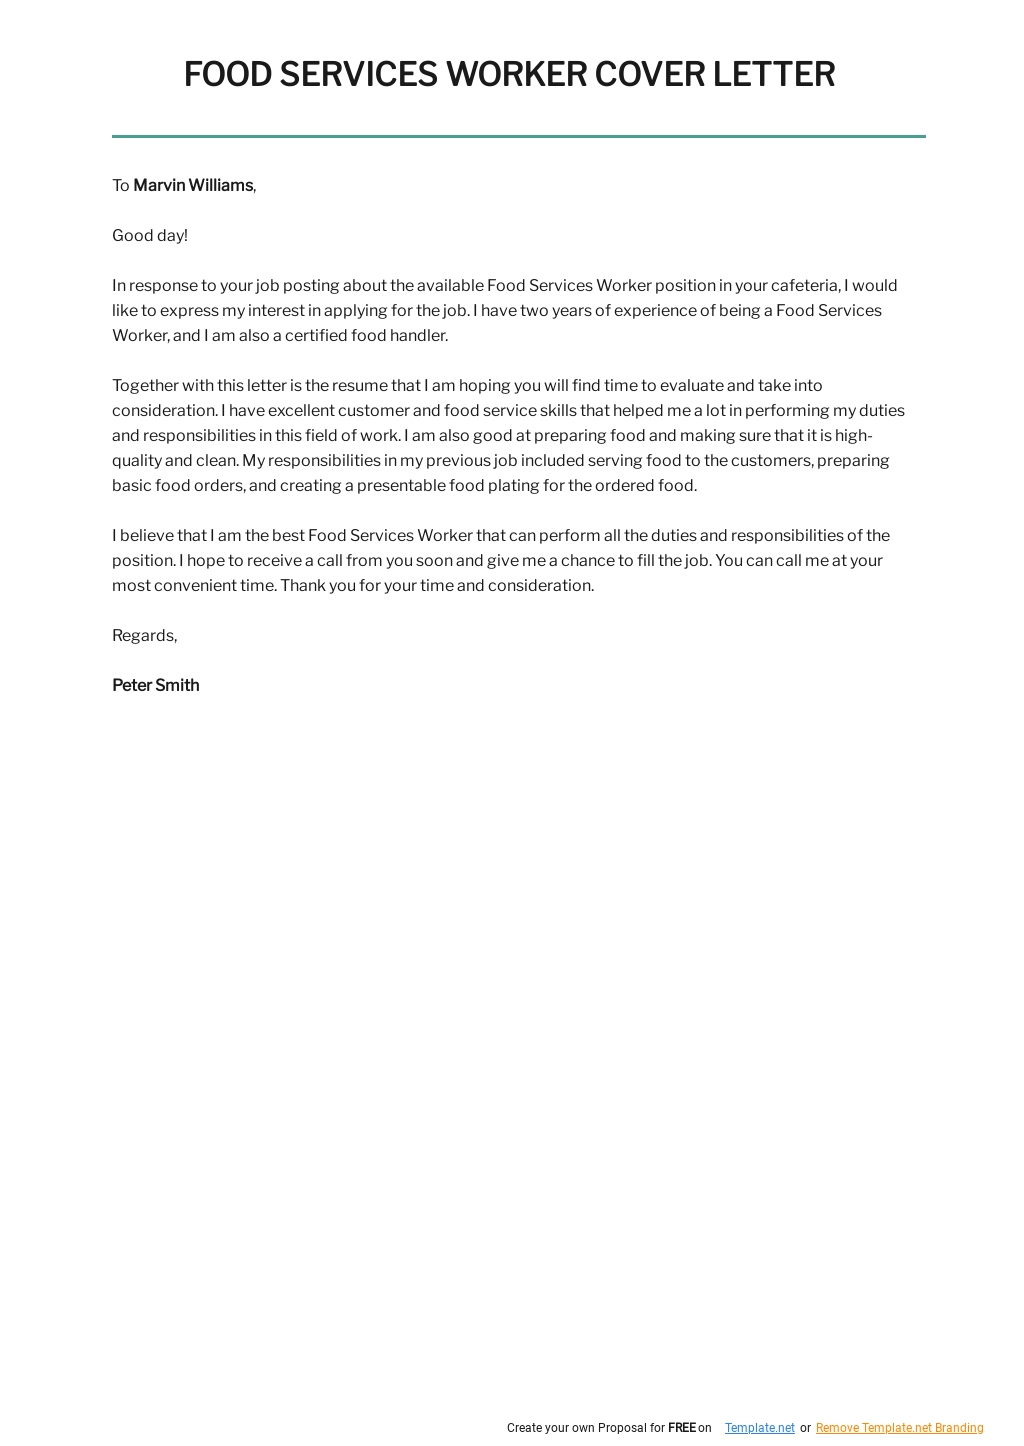 Food Services Worker Cover Letter Template.jpe